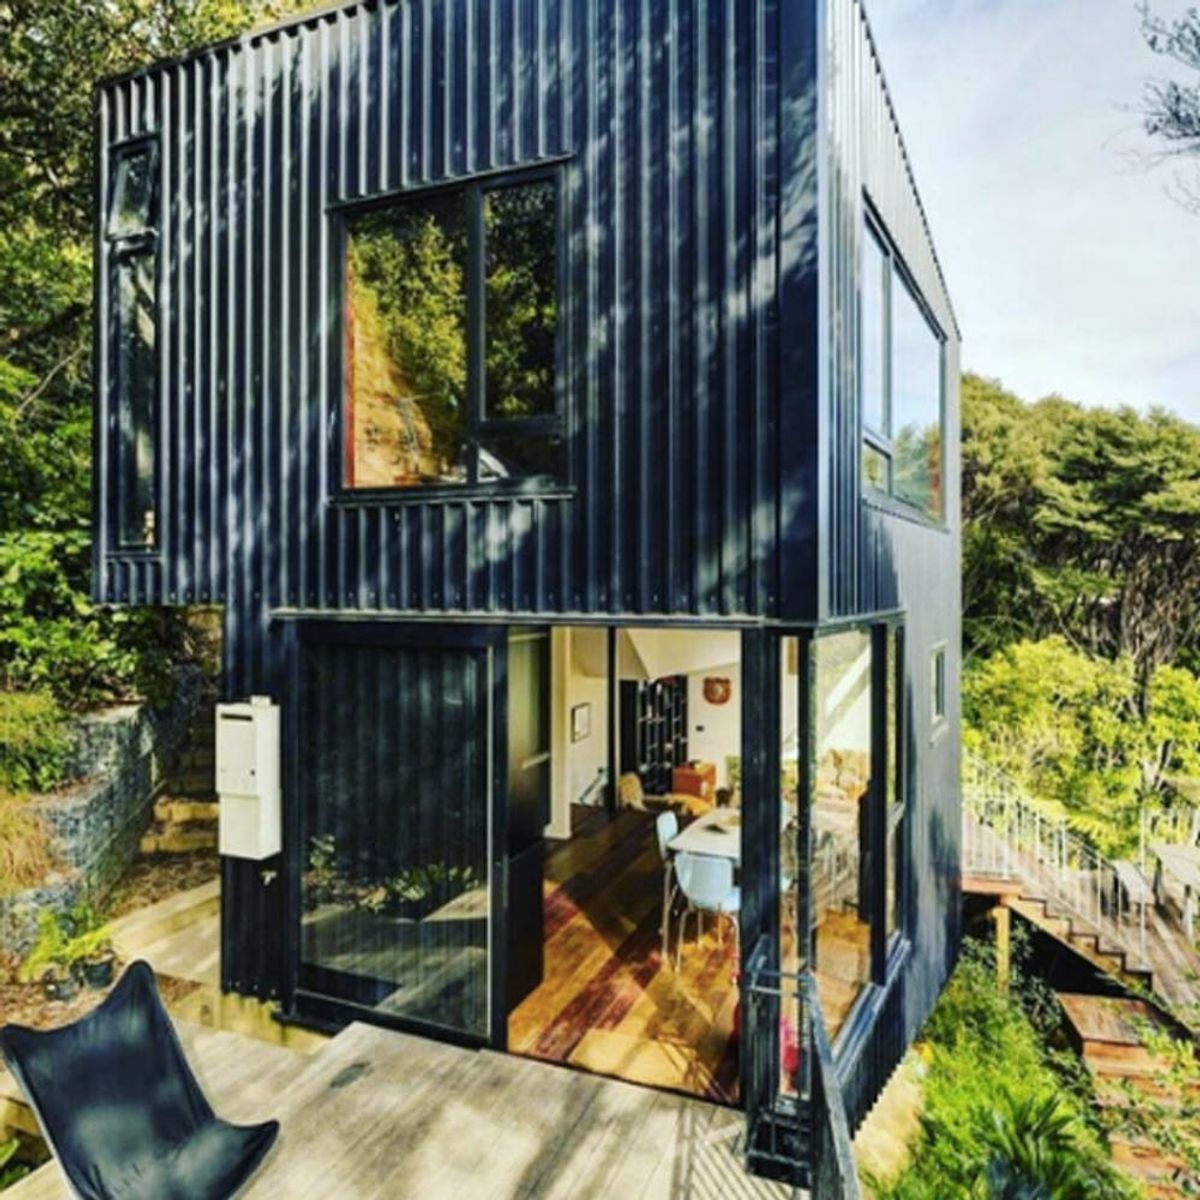 13 Shipping Container Homes That Will Have You Ready to Embrace Small Space Living